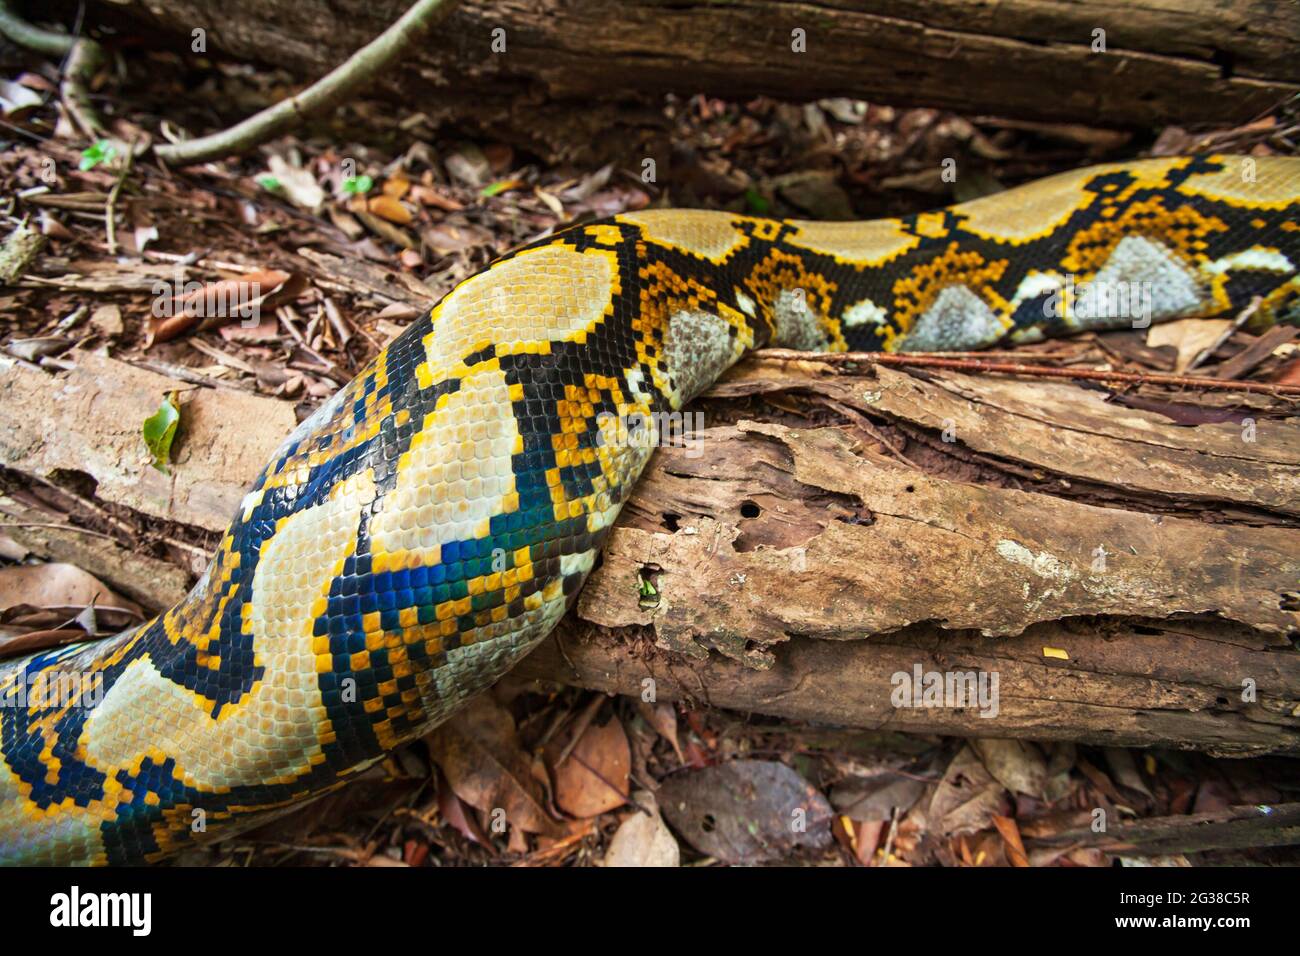 Boa laying on the log on ground of a tropical forest. They are the world’s longest snakes and longest reptiles. National Park near Cambodia-Thailand. Stock Photo